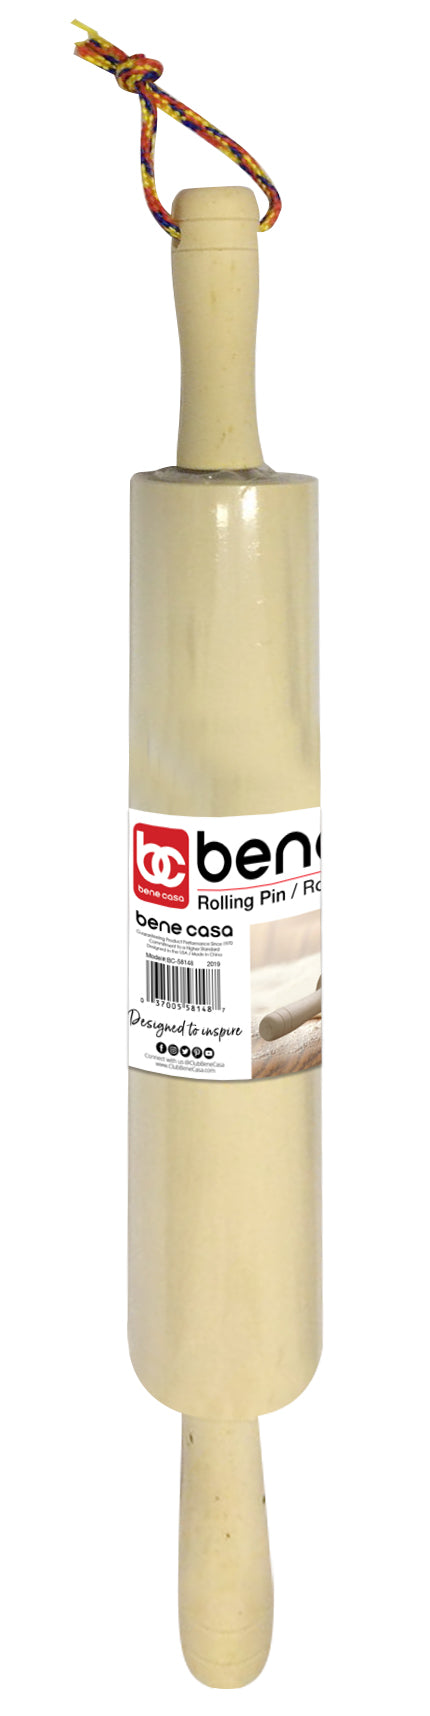 Bene Casa 18-inch wooden rolling pin, comfort handle rolling pin, easy clean, smooth rolling action rolling pin perfect for your kitchen